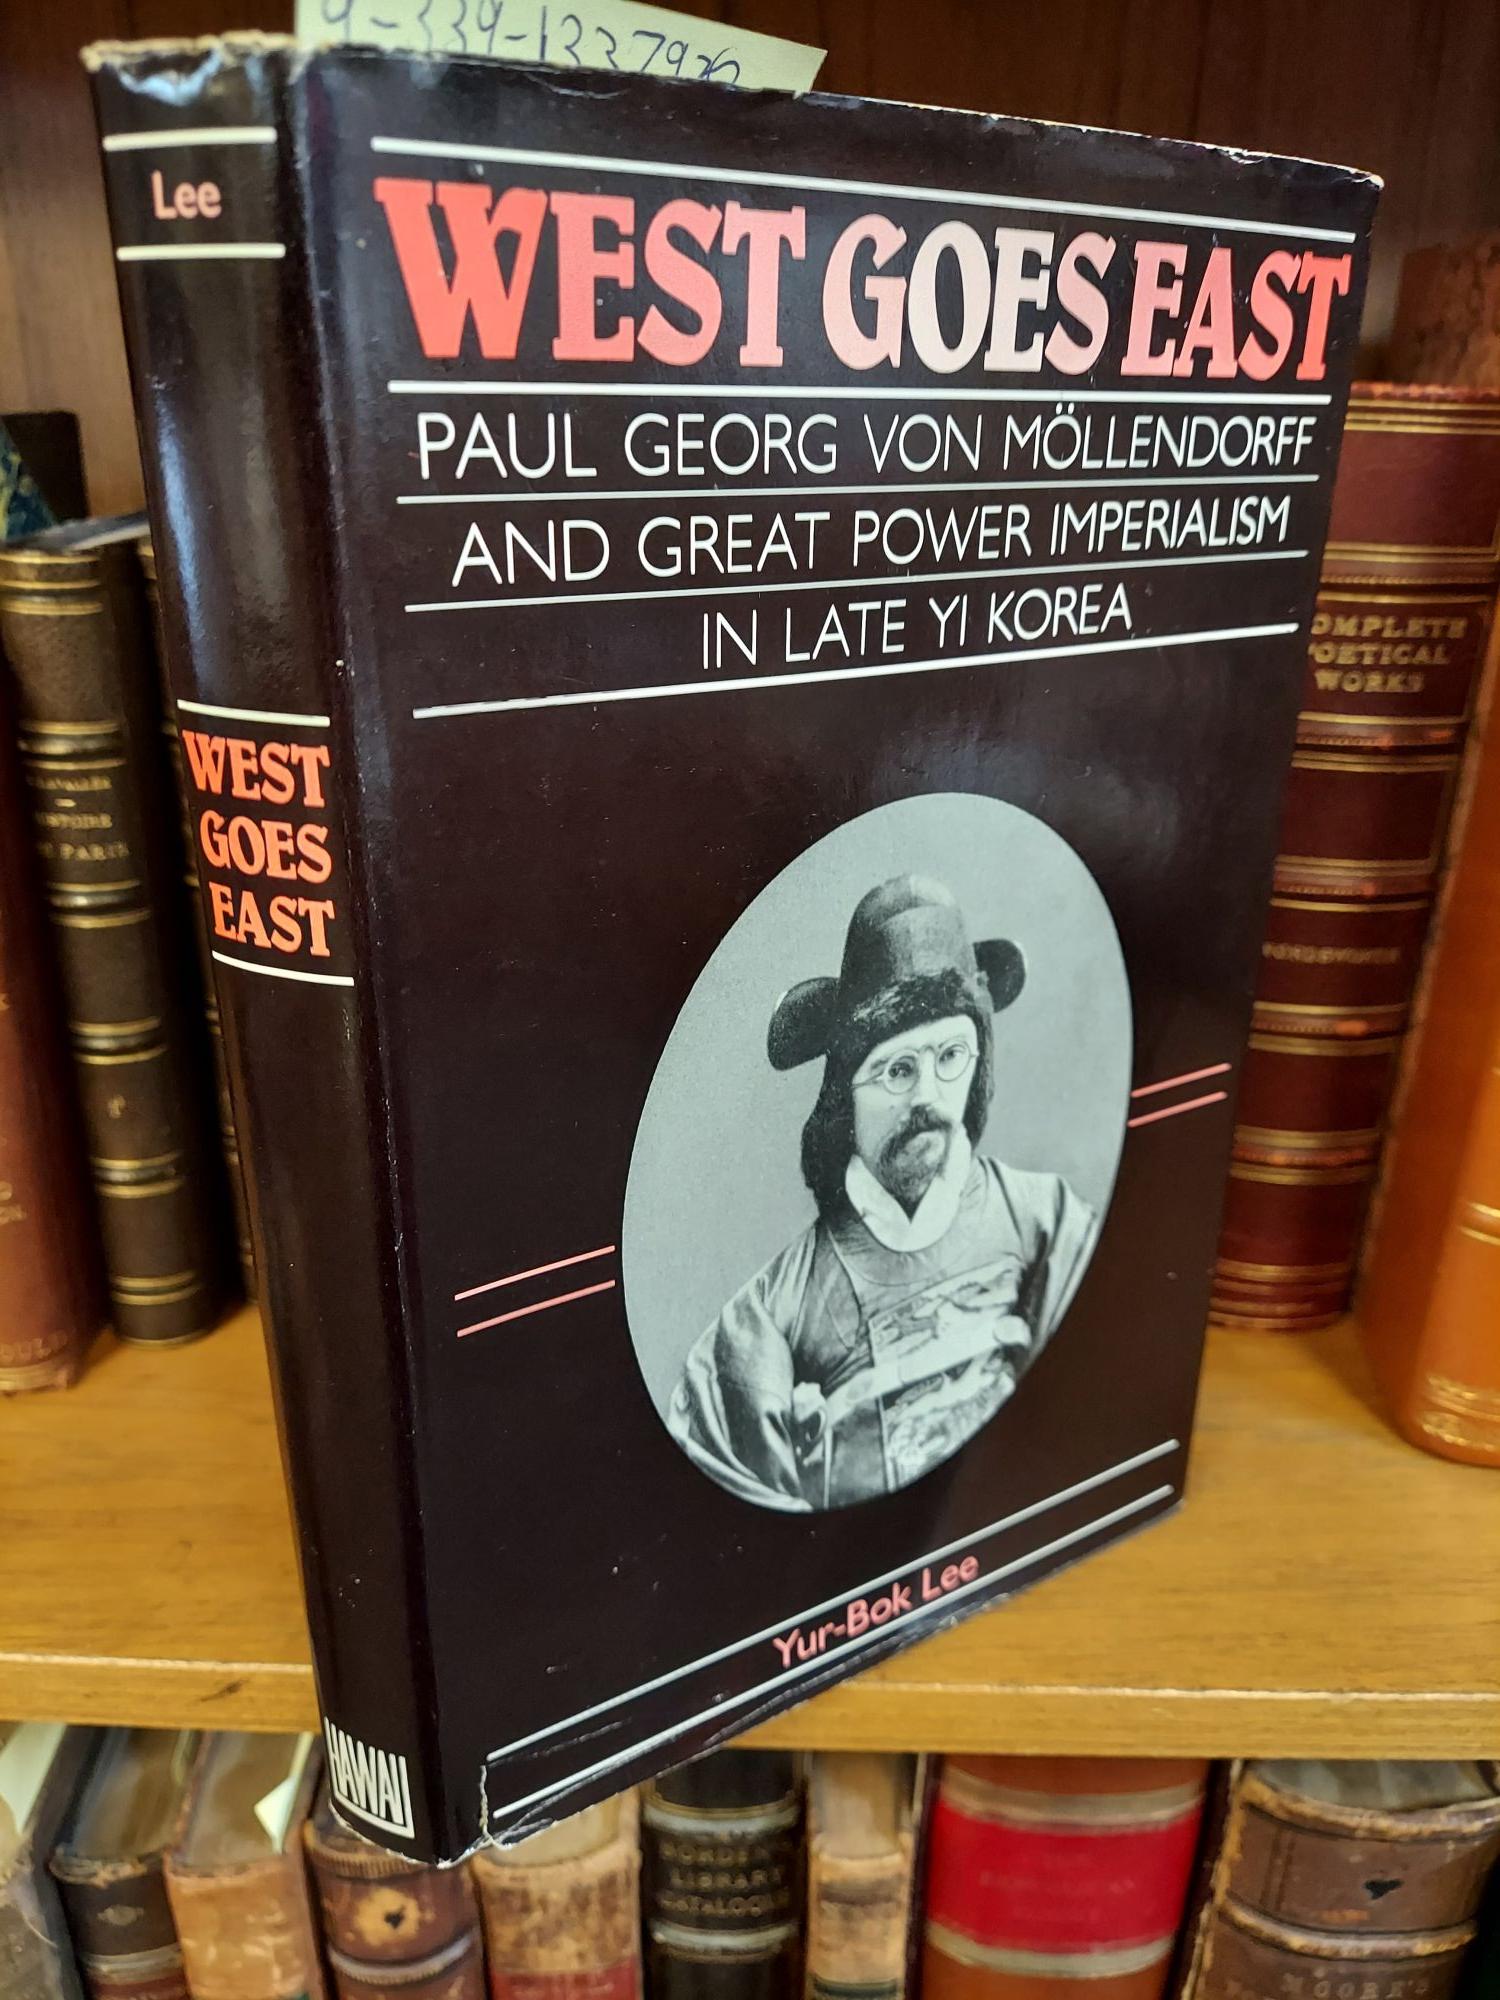 WEST GOES EAST: PAUL GEORG VON MOLLENDORF AND GREAT POWER IMPERIALISM IN LATE YI KOREA - Lee, Yur-Bok